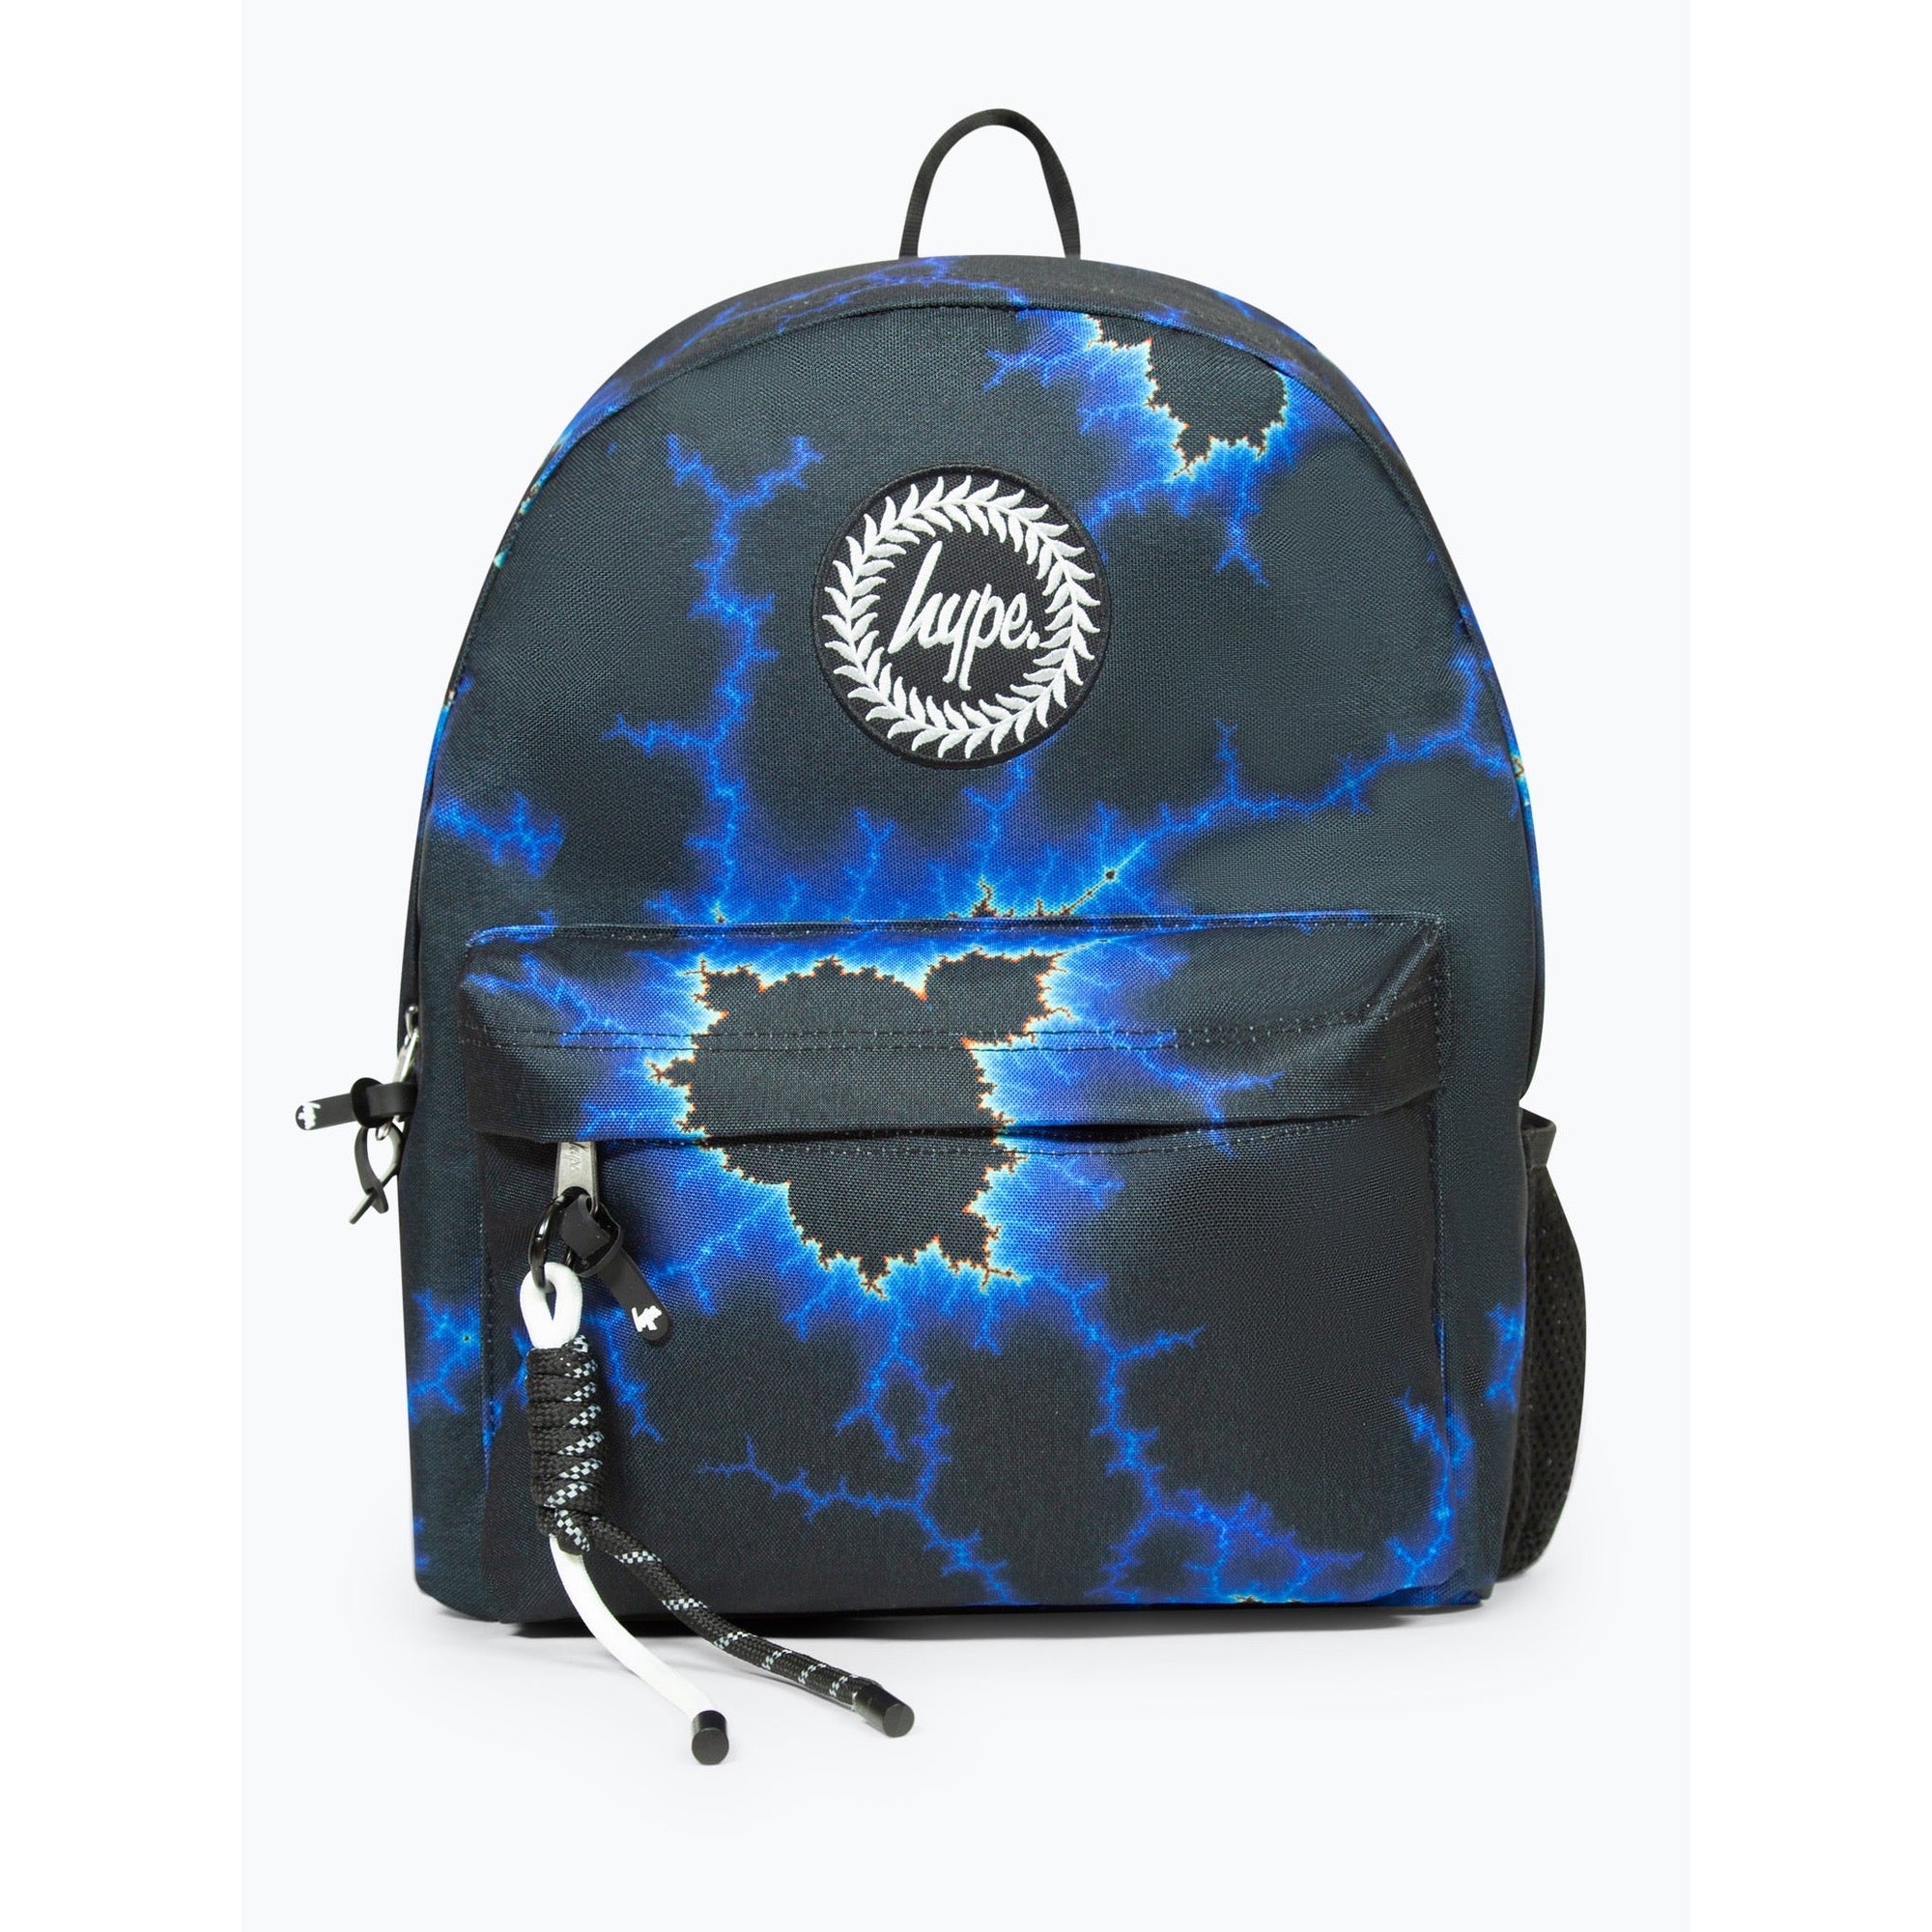 Hype Black Blue Lightening Backpack Xtlr016 Accessories ONE SIZE / Multi